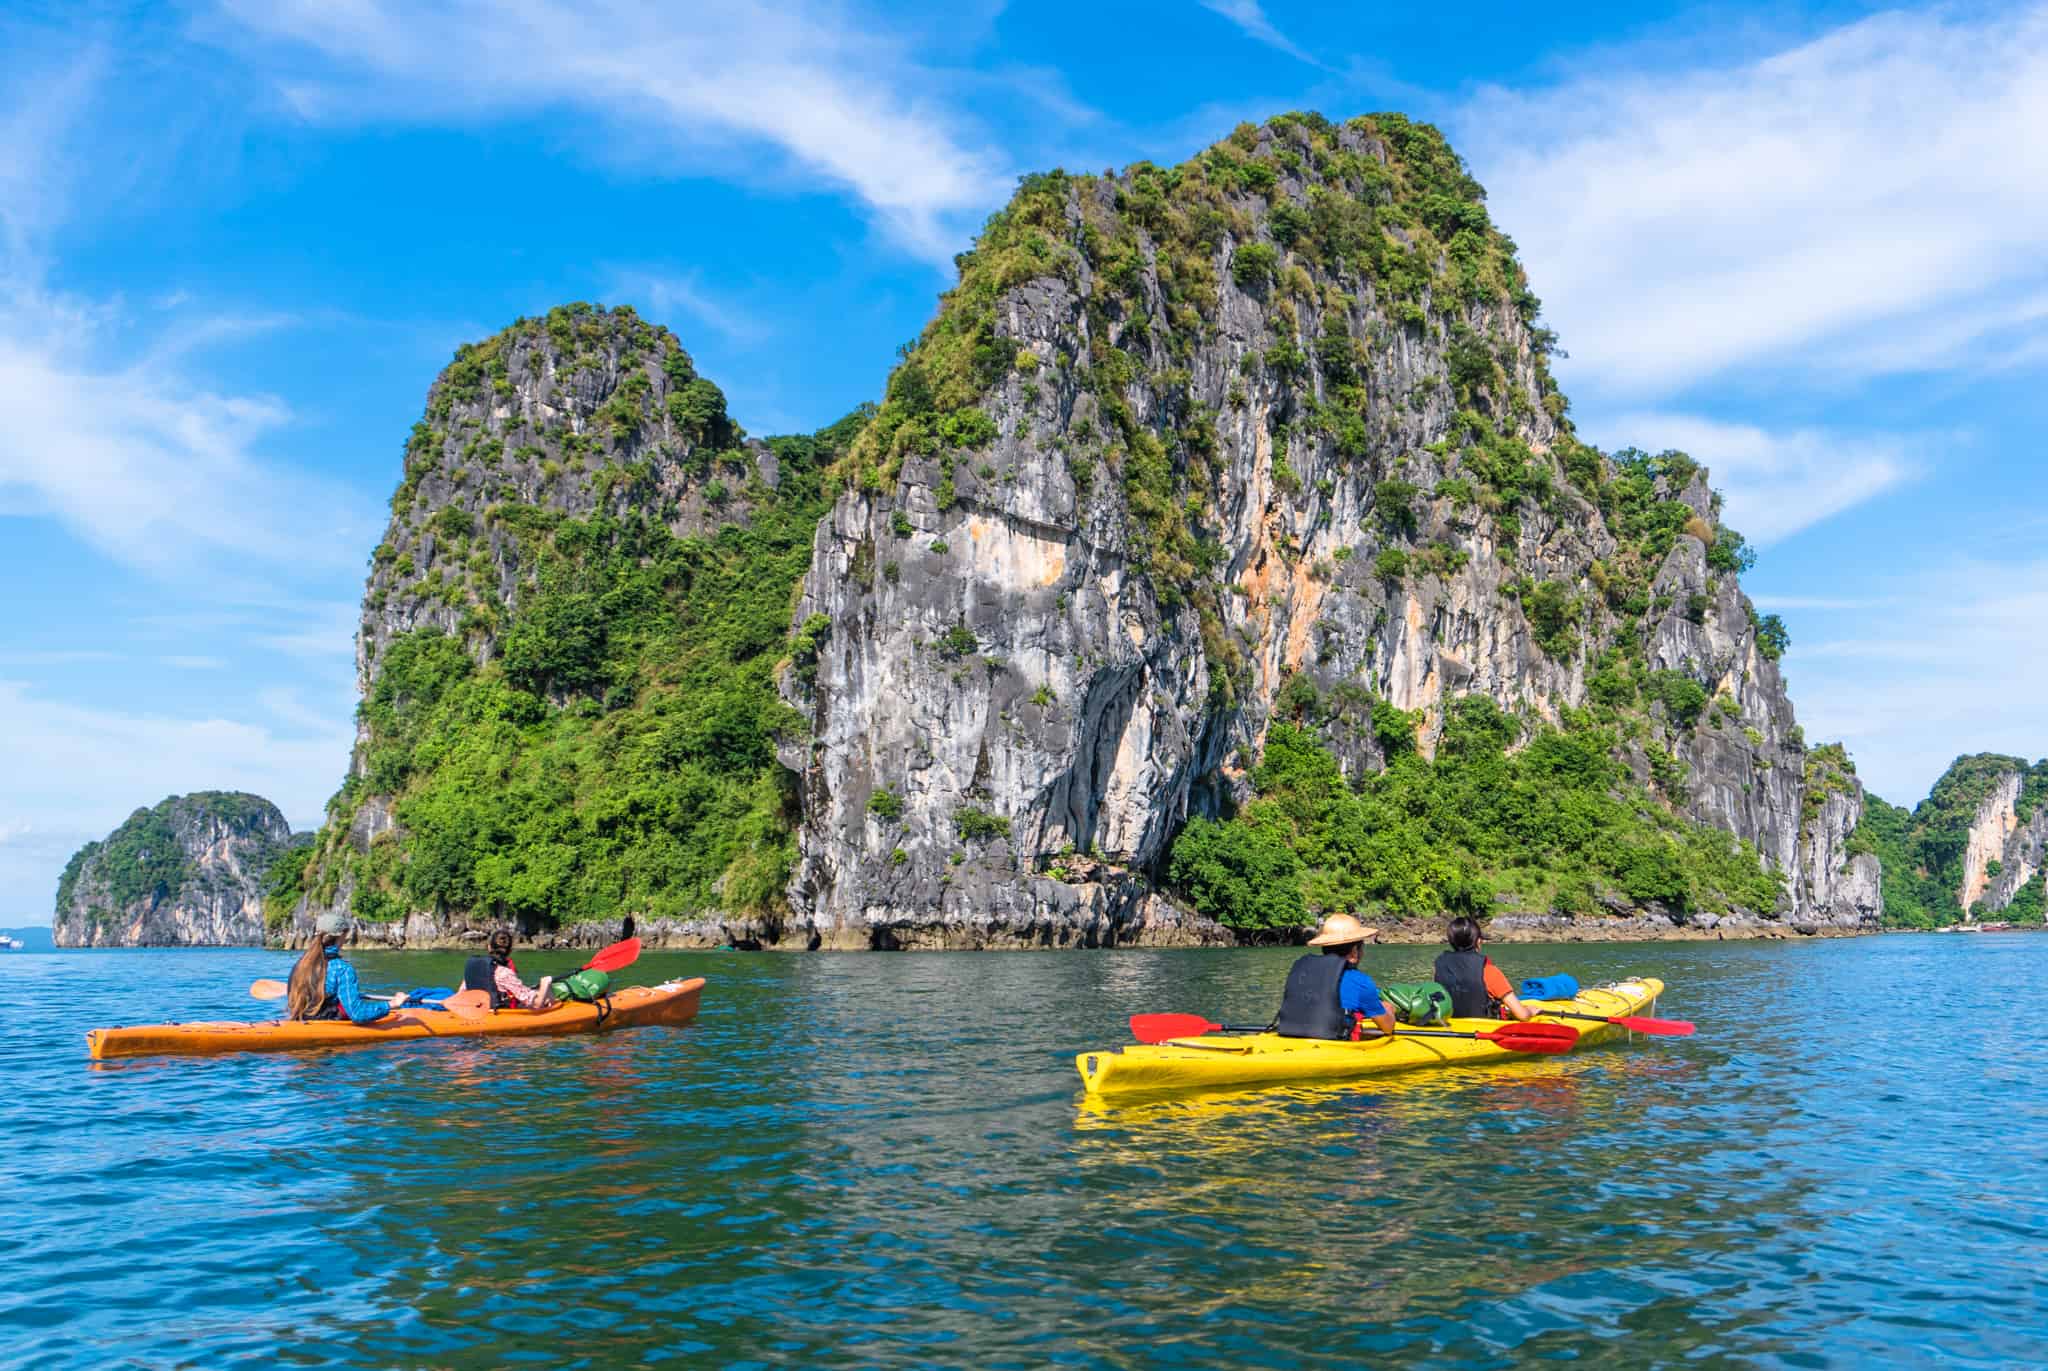 Kayaking Bai Tu Long: One Of The Best Things To Do In Halong Bay.